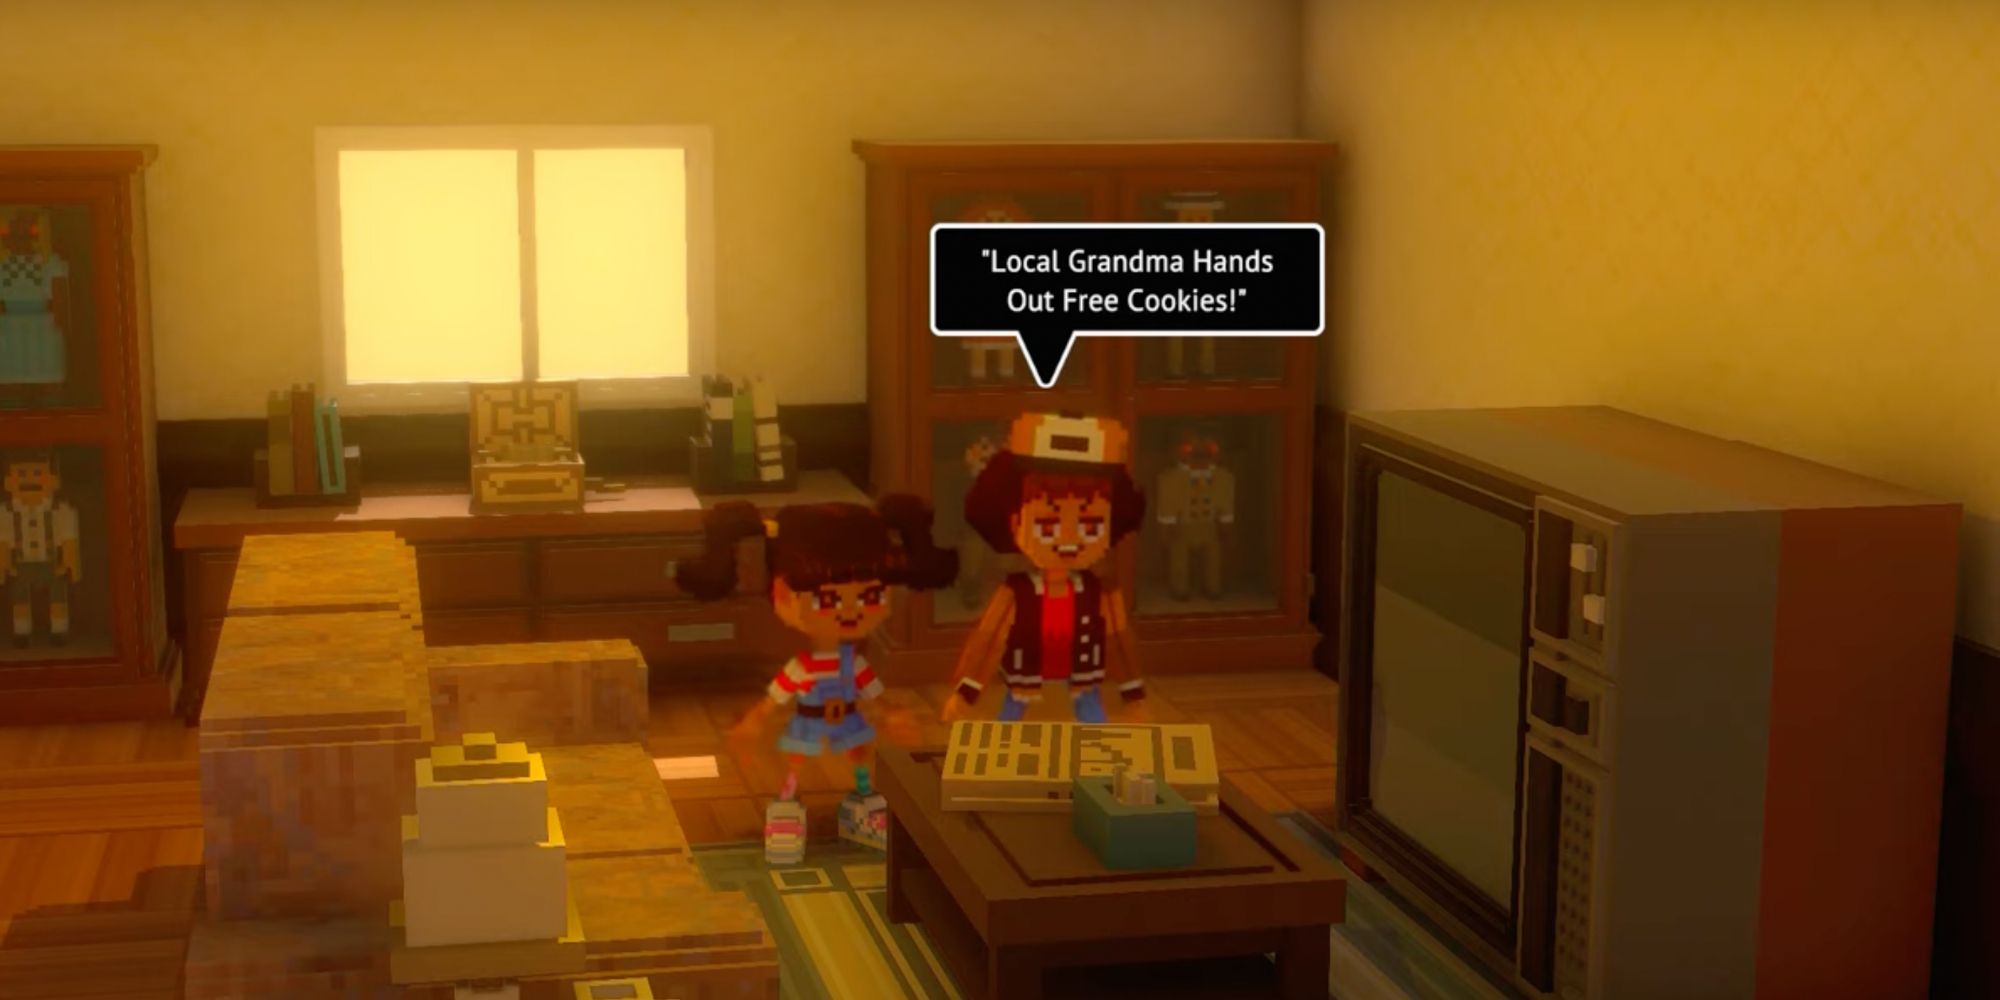 The player character learns that a local grandma is handing out cookies in Echo Generation